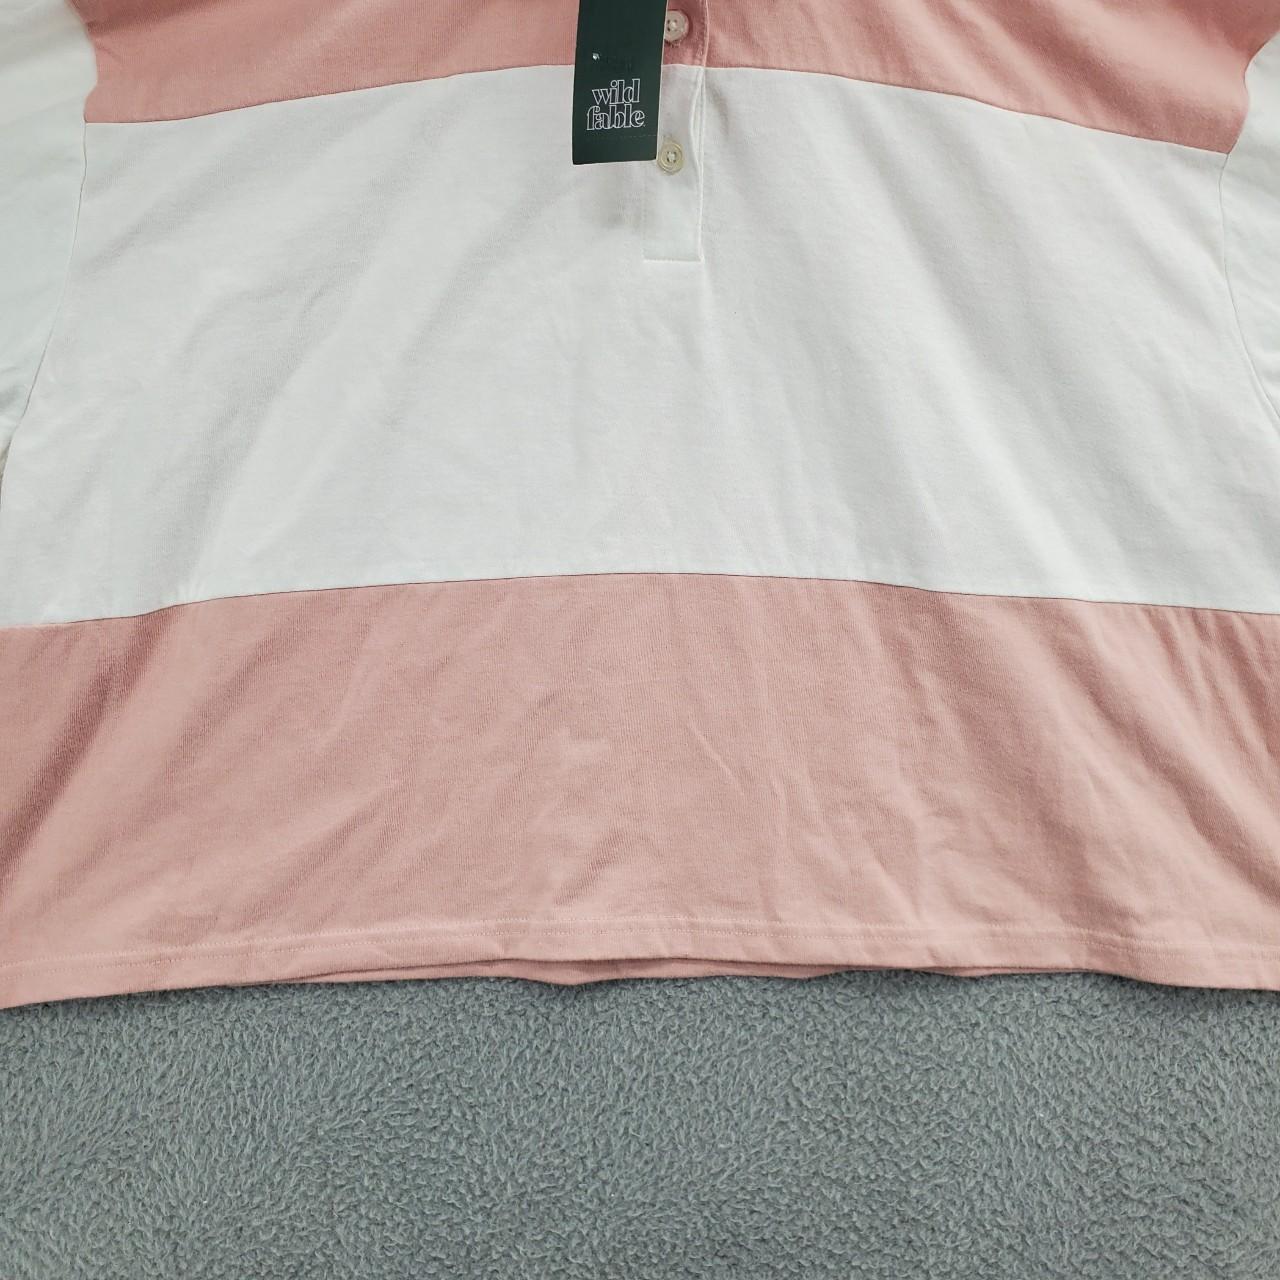 Women's Short Sleeve Boxy Crop Top Polo T-Shirt Wild Fable Pink